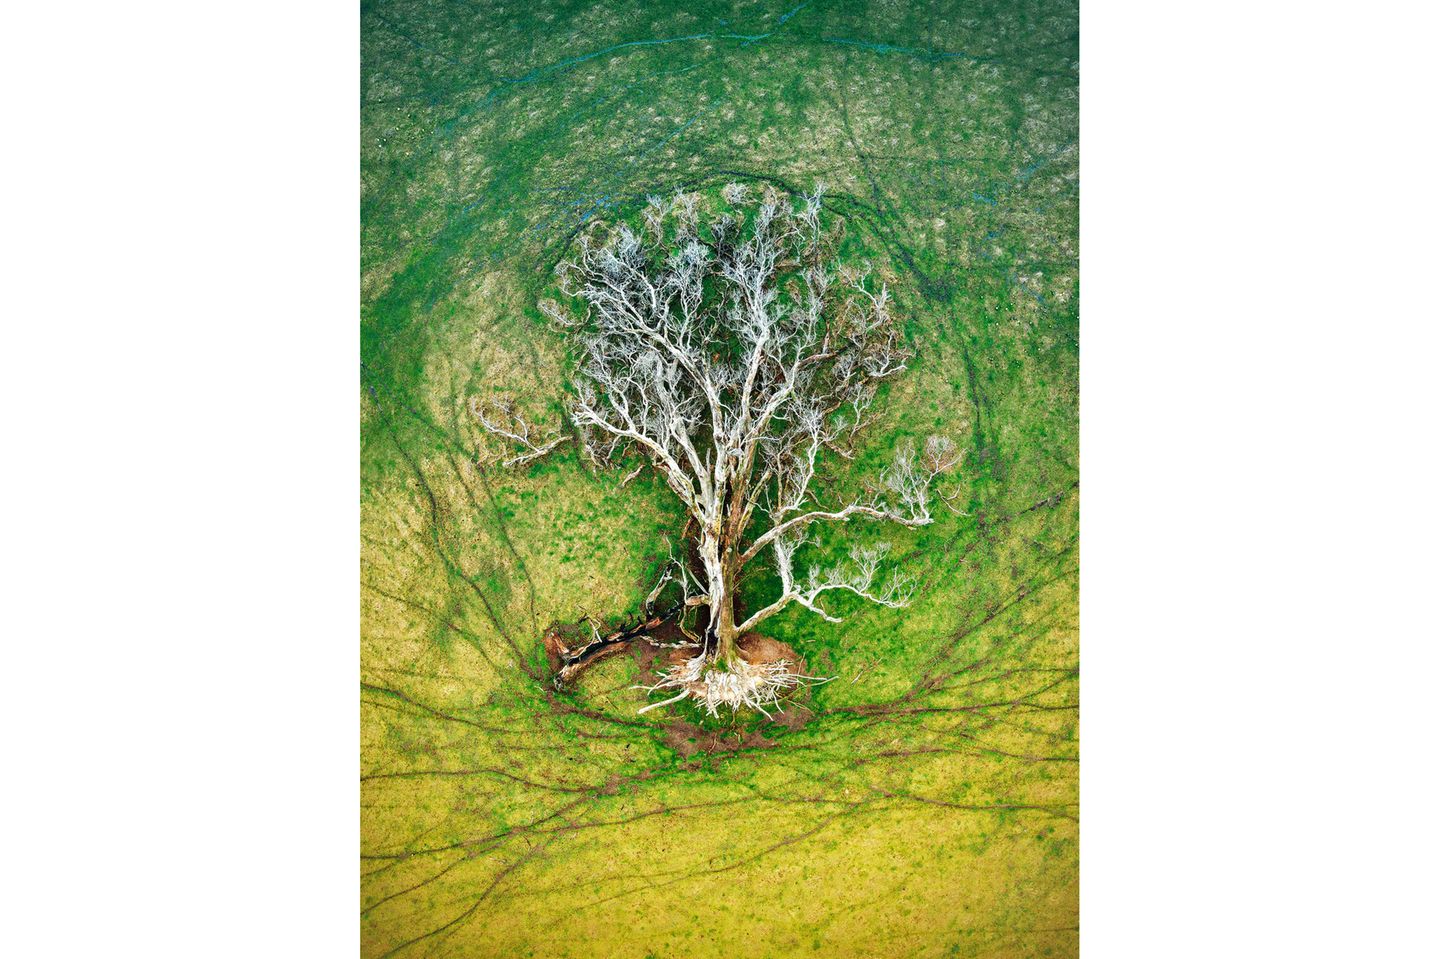 GOLD: JULIE KENNY, AUSTRALIA  The tree is seen as a sacred symbol, which carries significant meanings in both religious and spiritual philosophies. From above the surrounding sheep tracks combined with the fallen tree reminded me of the Tree of Life. While the aerial perspective focuses on the earth, you can see the pooled water in the sheep tracks reflecting hints of blue from the sky. While this represents many different things, for me it communicates the interconnection of all things, beginnings and endings, the cycling of life.